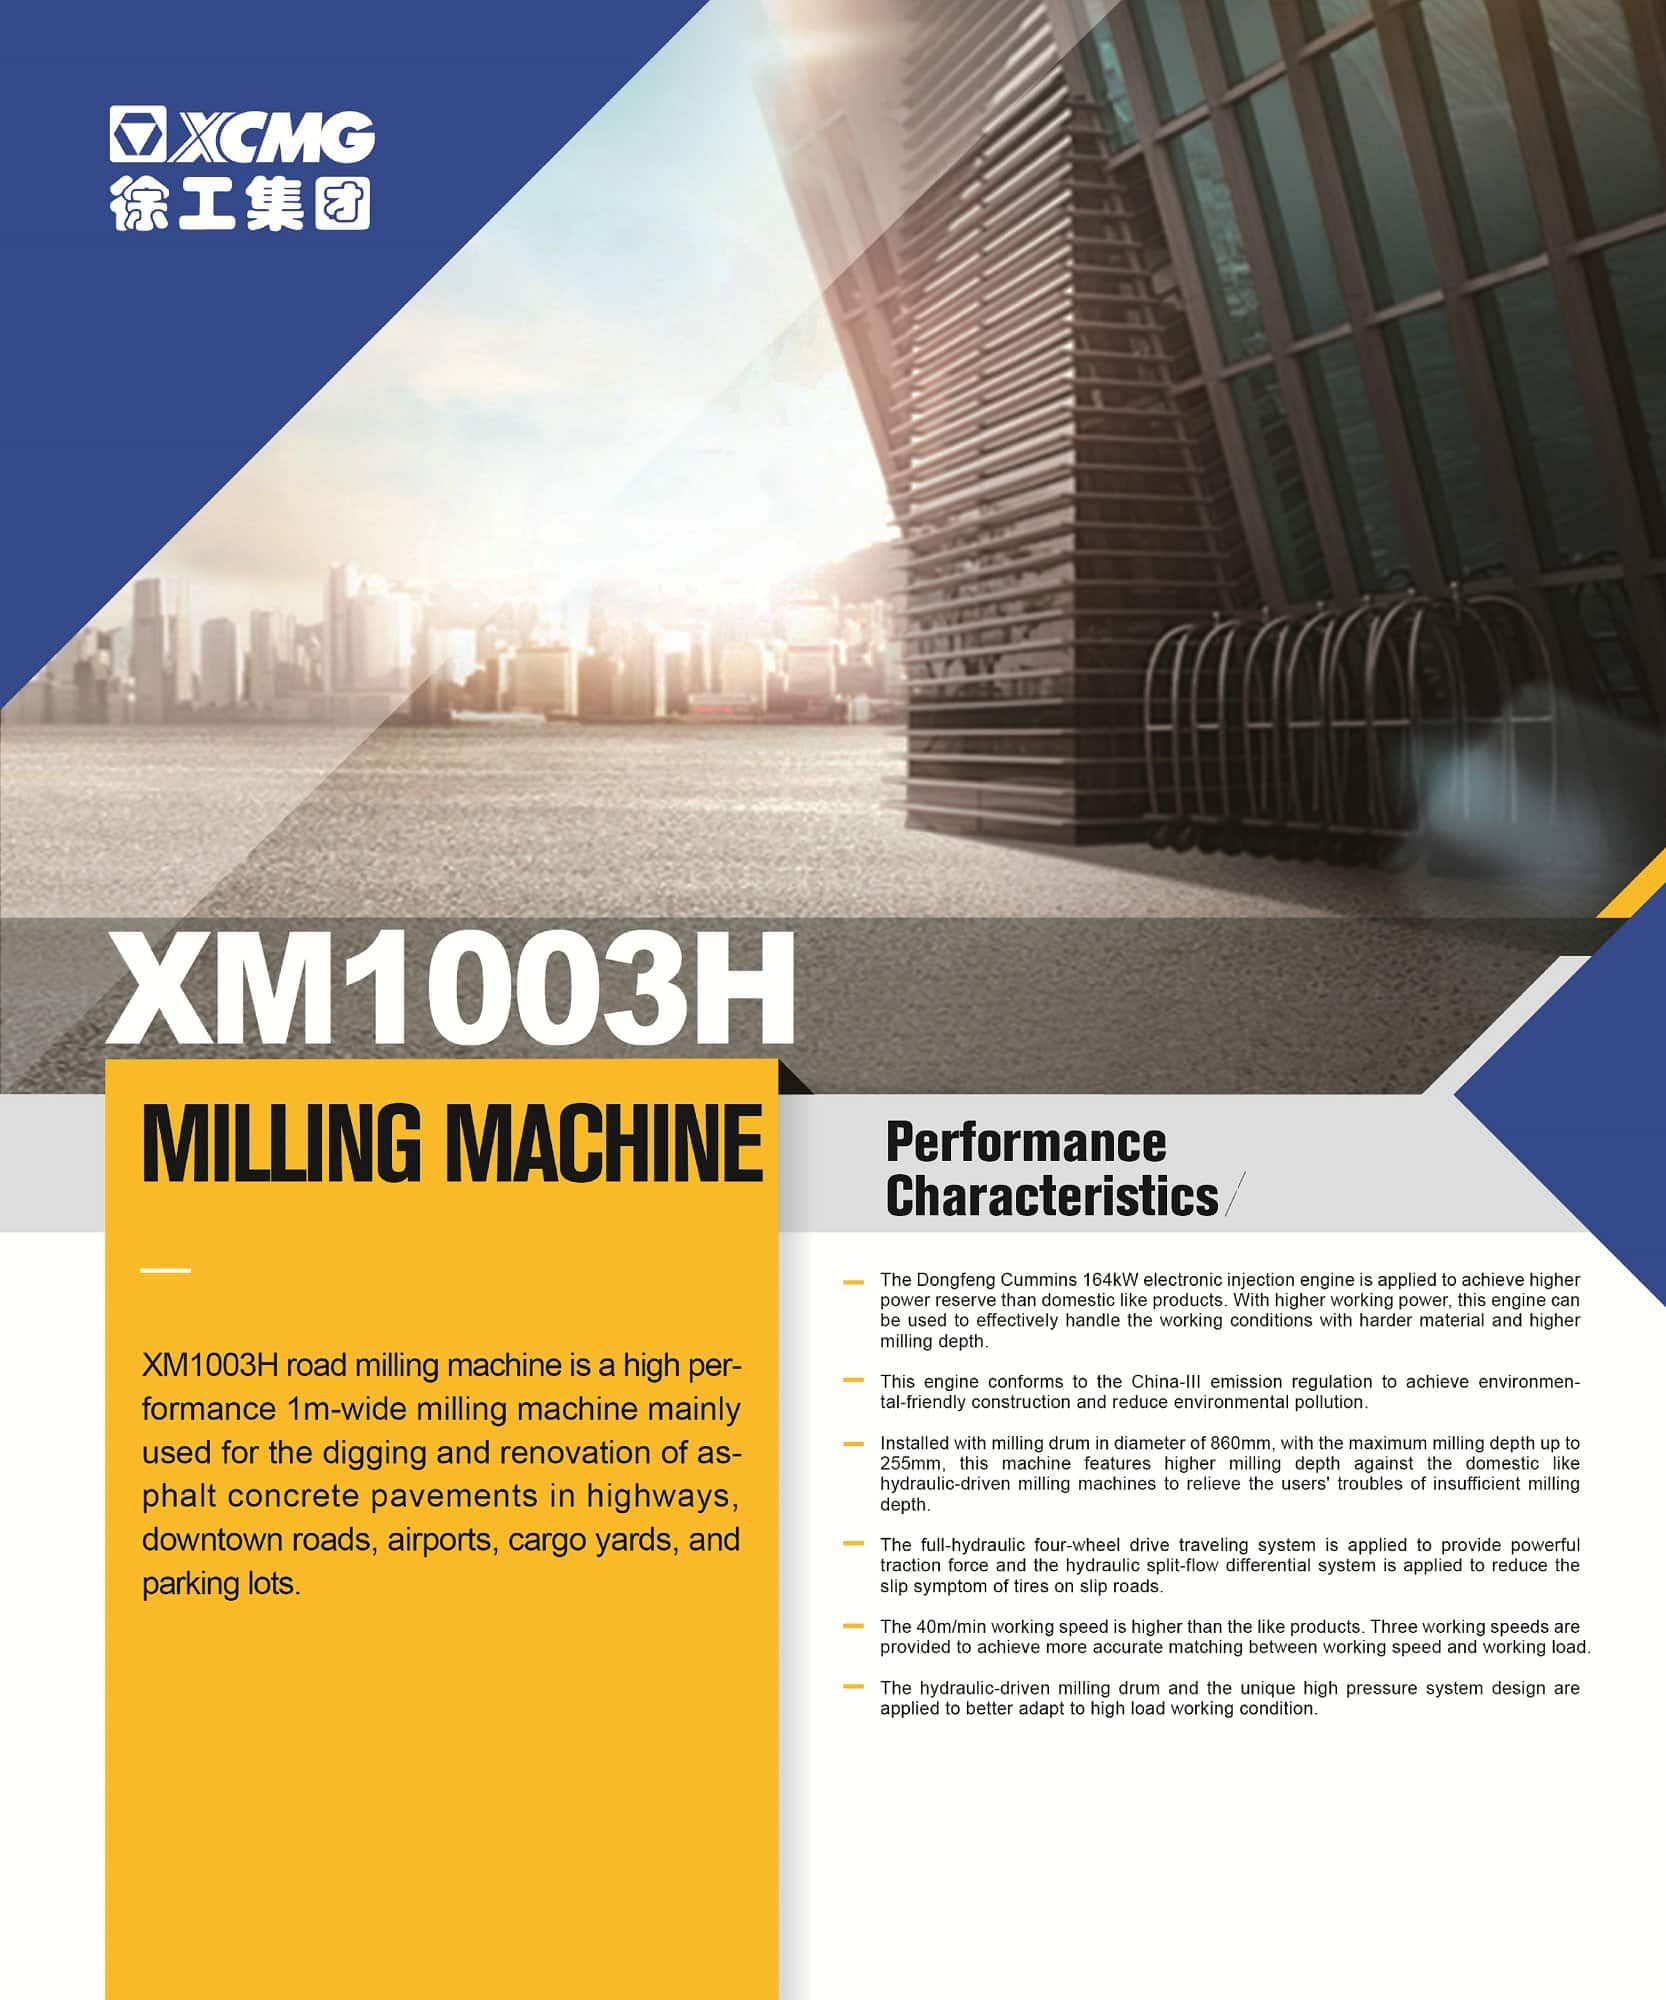 XCMG official XM1003H milling Machine for sale